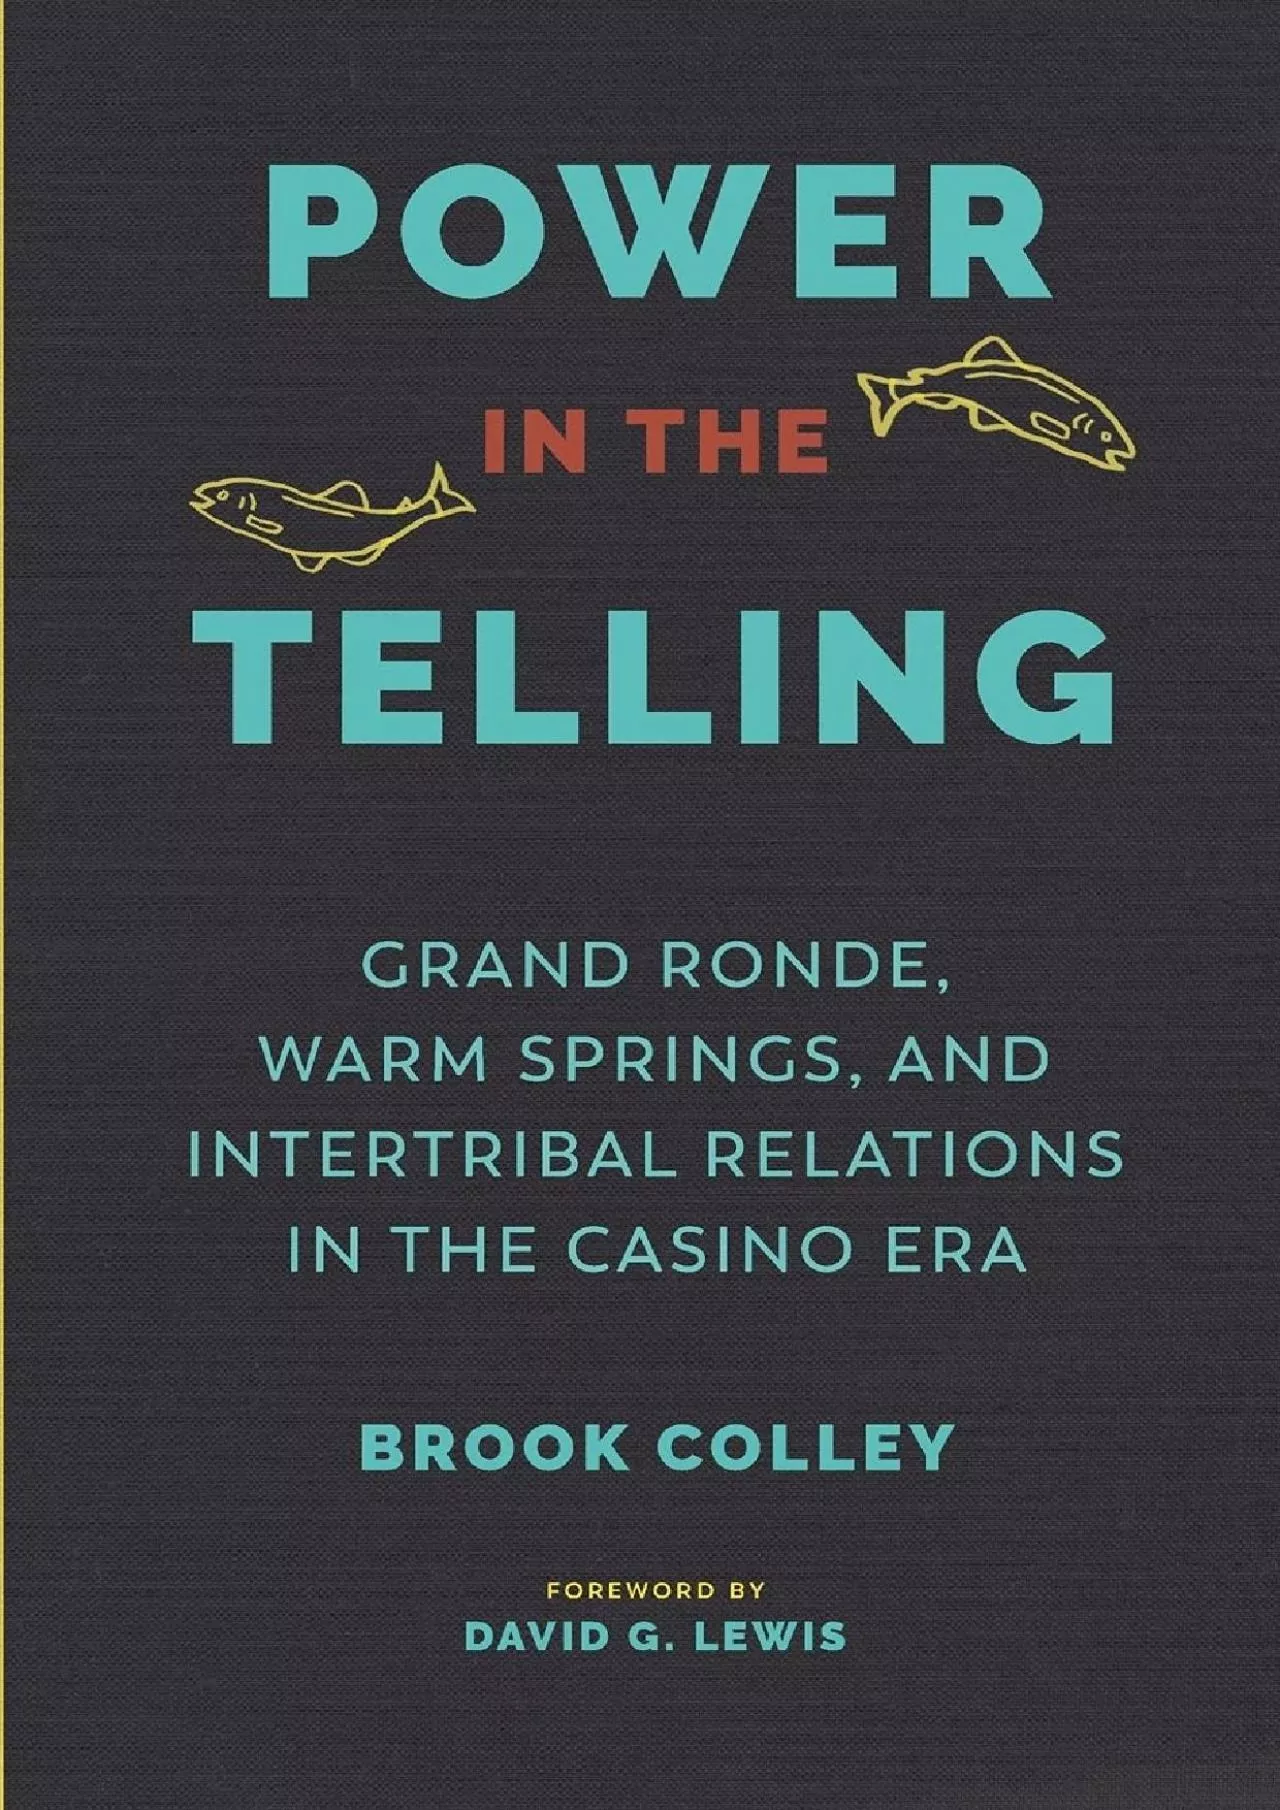 (DOWNLOAD)-Power in the Telling: Grand Ronde, Warm Springs, and Intertribal Relations